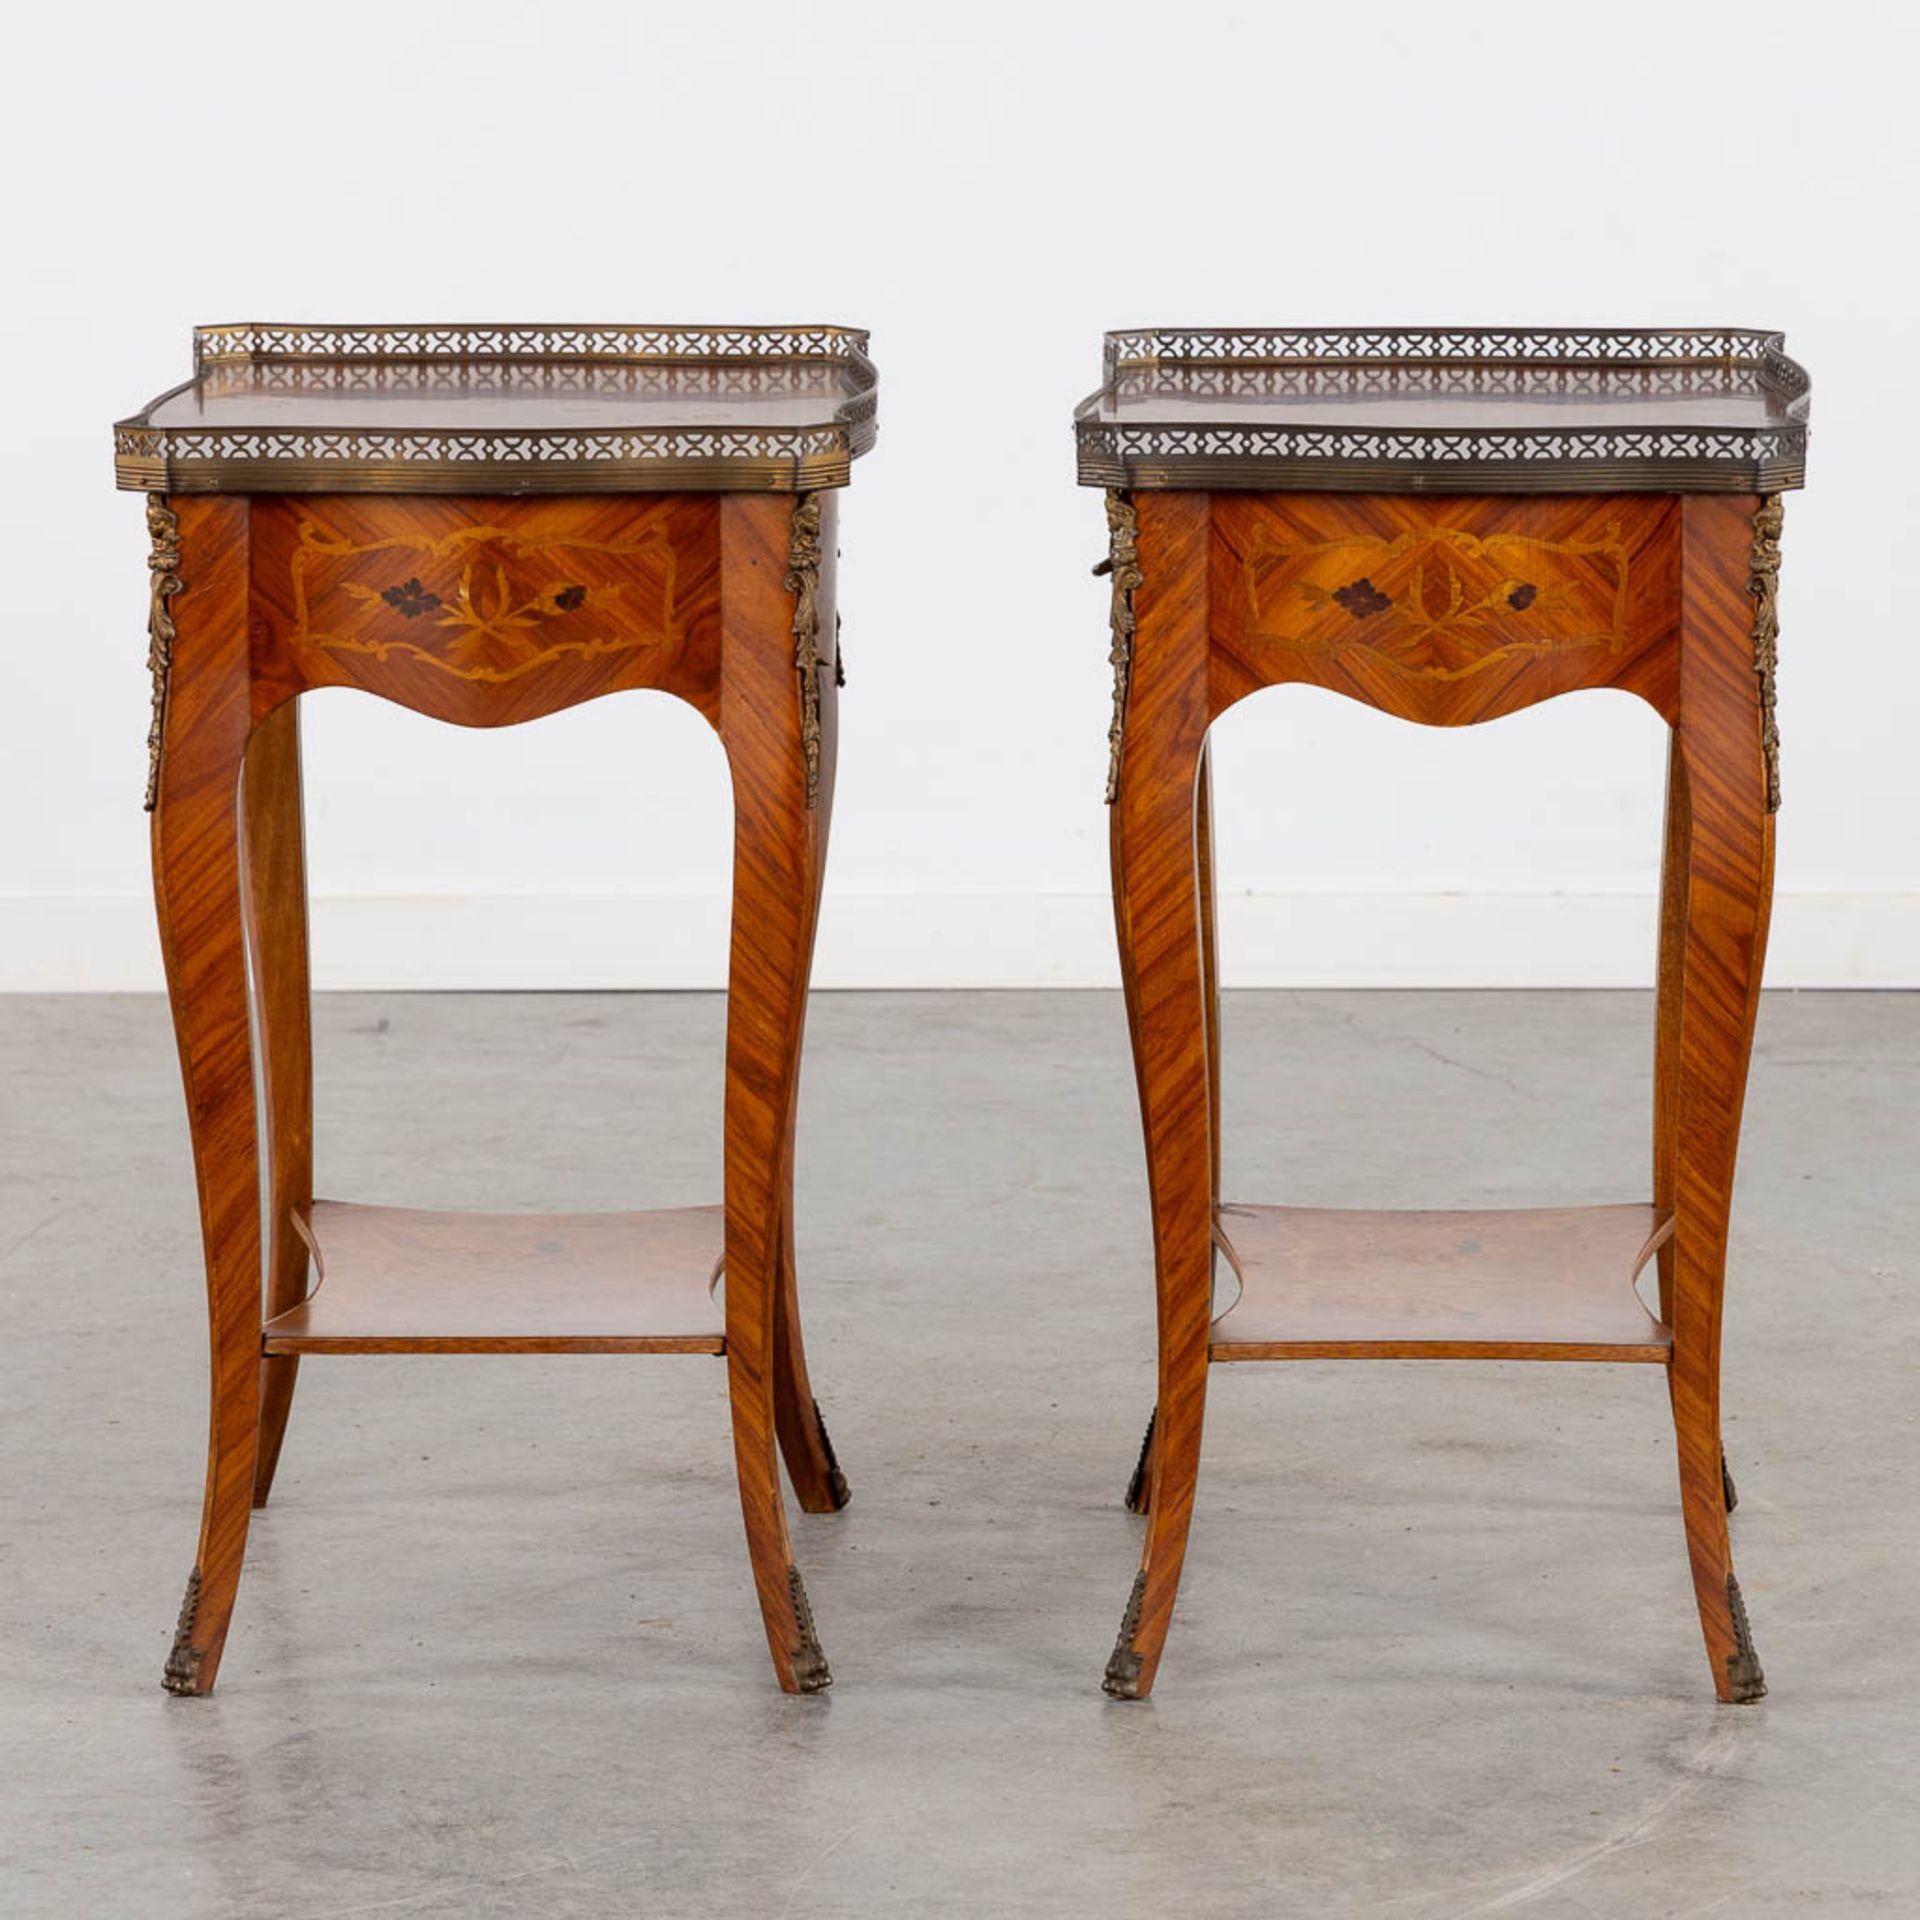 A pair of side tables, marquetry inlay and mounted with bronze. (L:37 x W:51 x H:65 cm) - Bild 5 aus 13